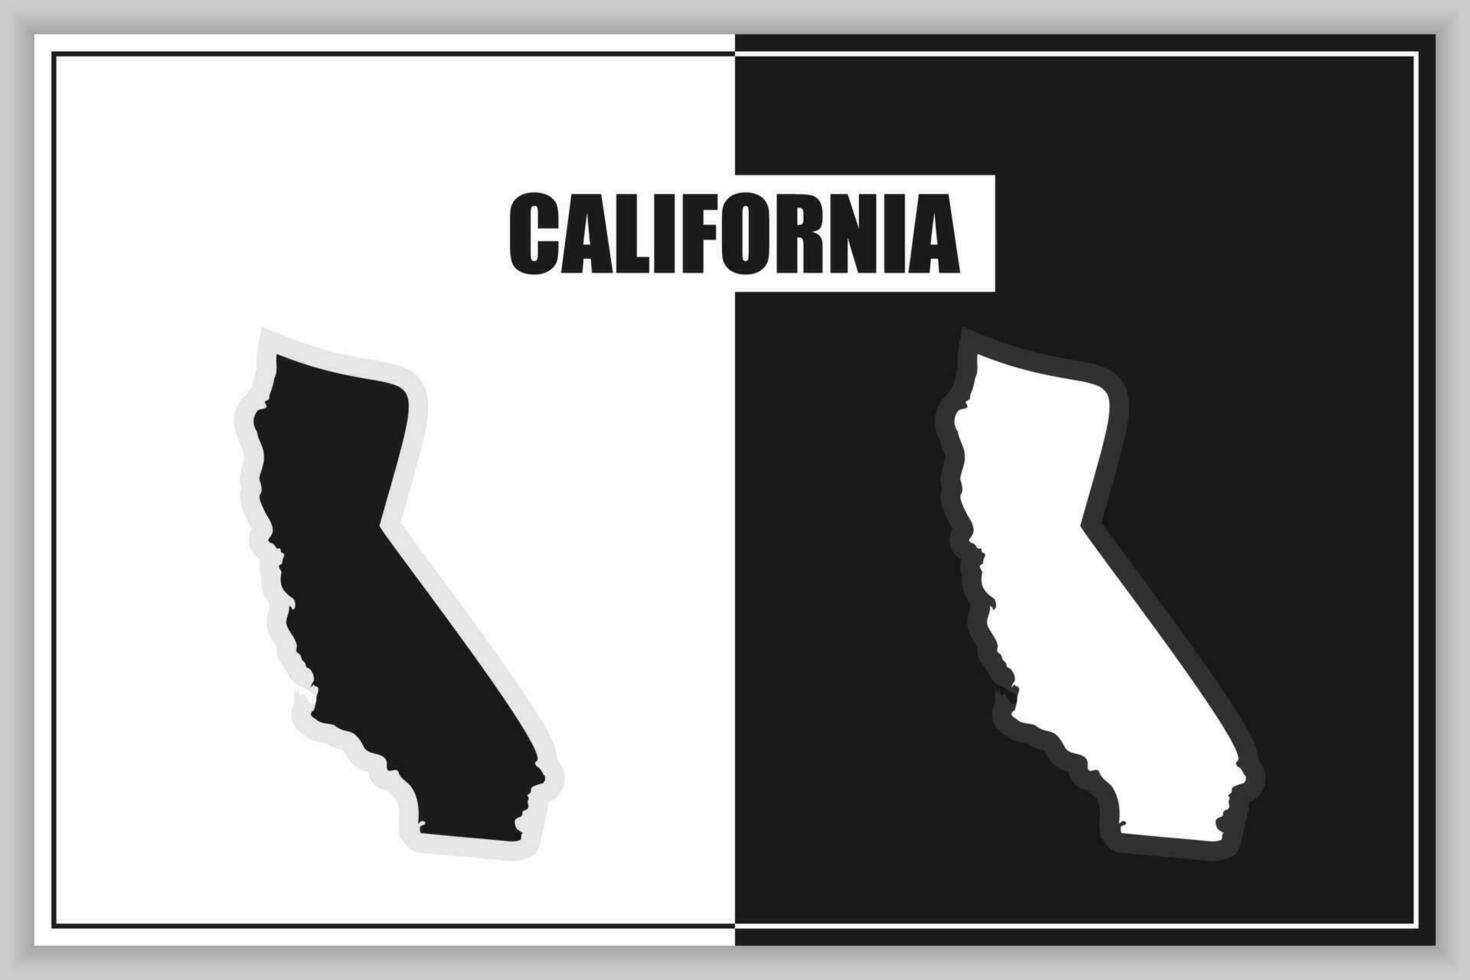 Flat style map of State of California, USA. California outline. Vector illustration